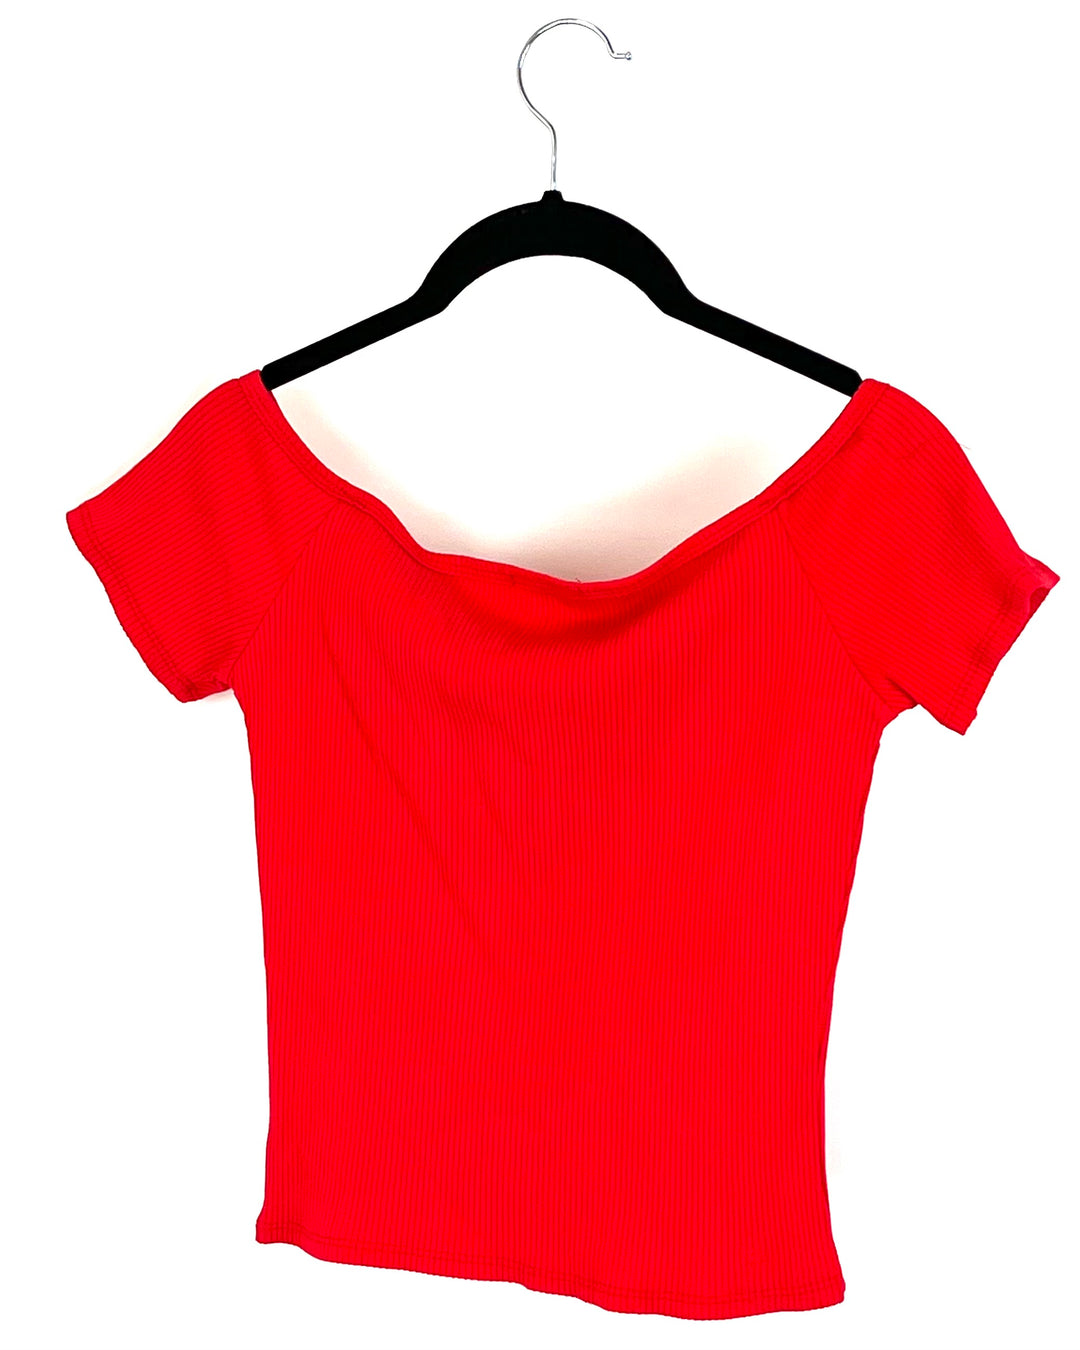 Red Short Sleeve Cropped Top - Size 0/2